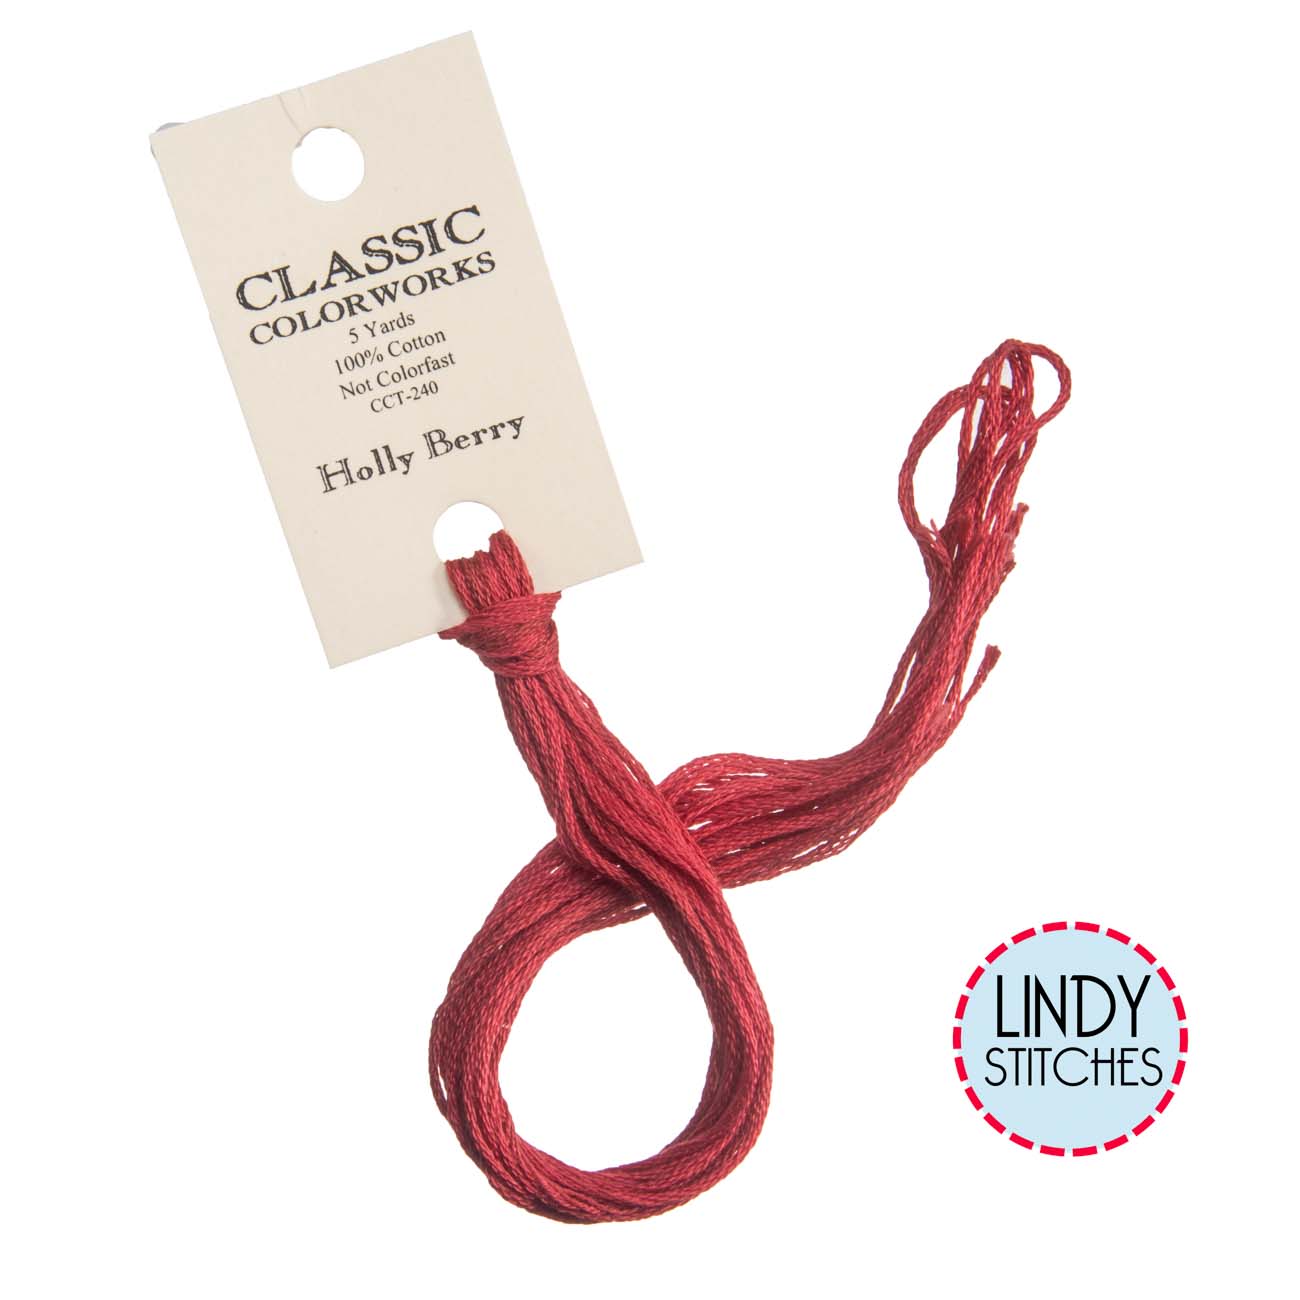 Holly Berry Classic Colorworks Floss Hand Dyed Cotton Skein